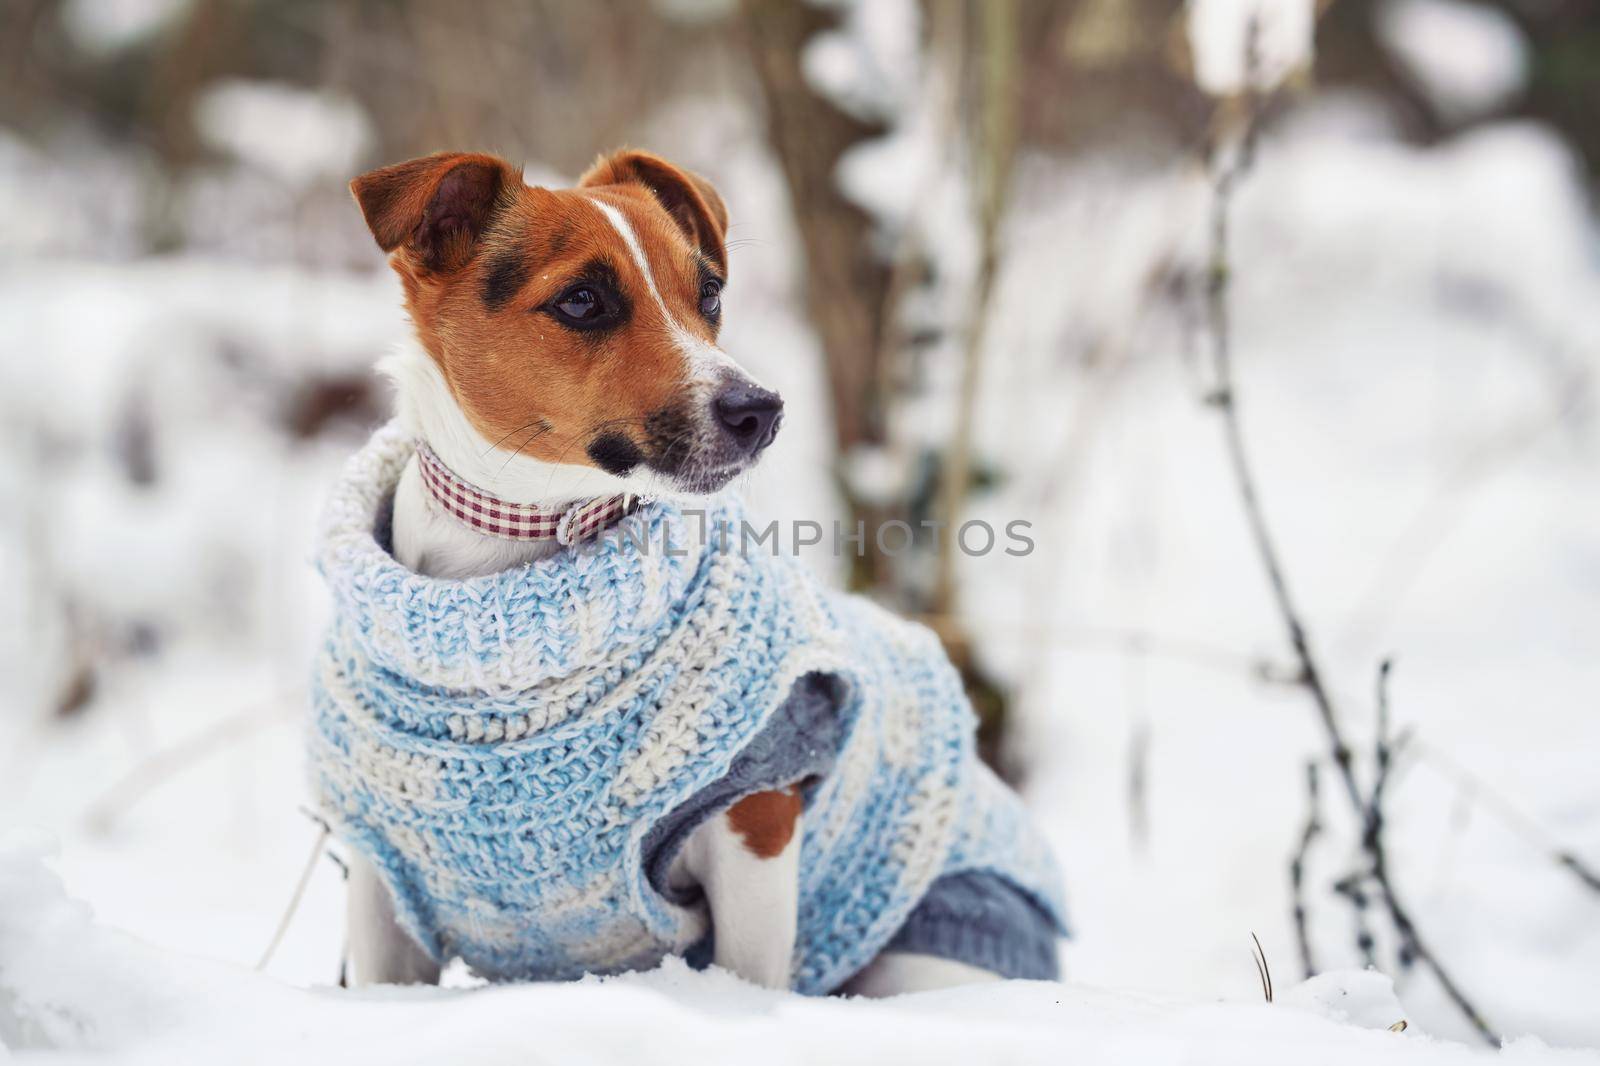 Small Jack Russell terrier sitting on snow covered field wearing knitted white blue jumper, looking curiously.